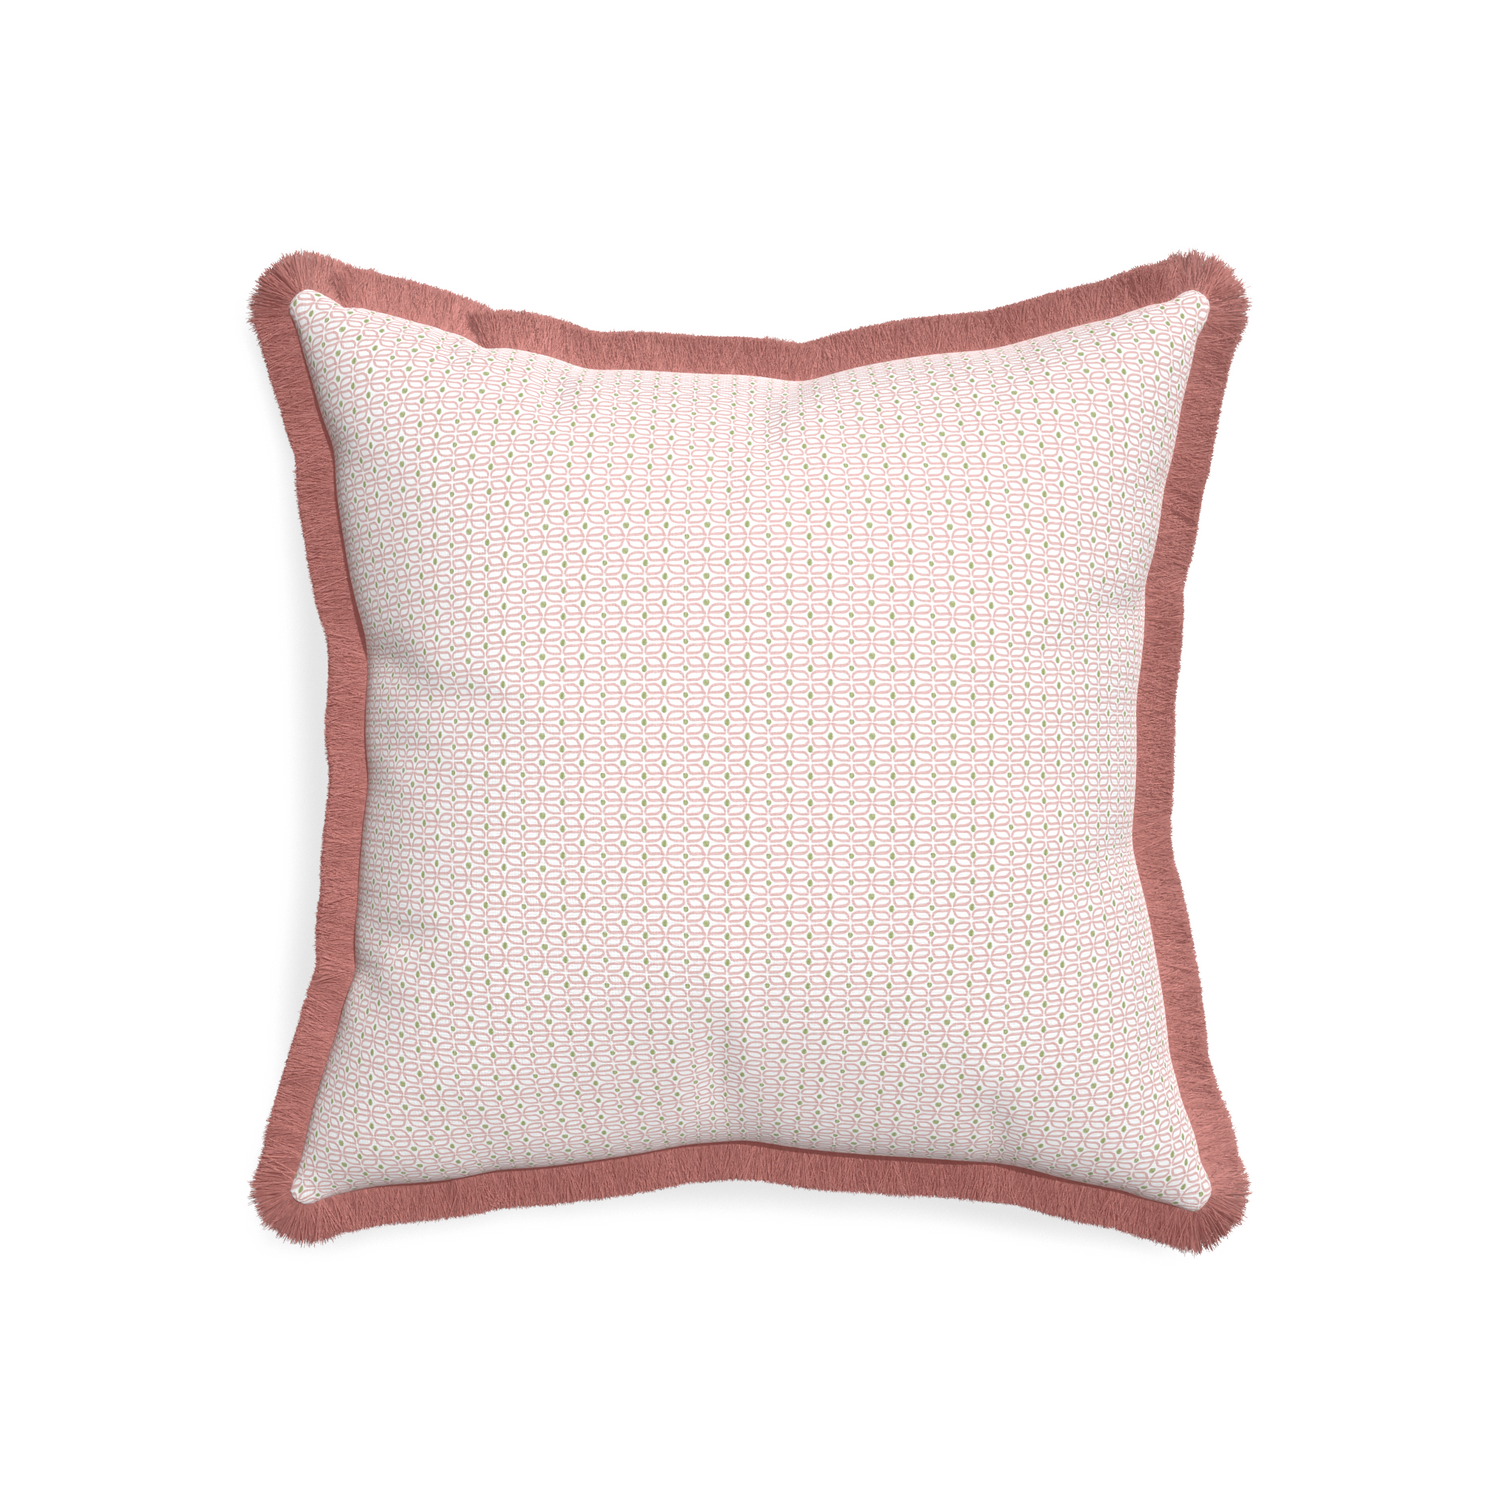 20-square loomi pink custom pillow with d fringe on white background